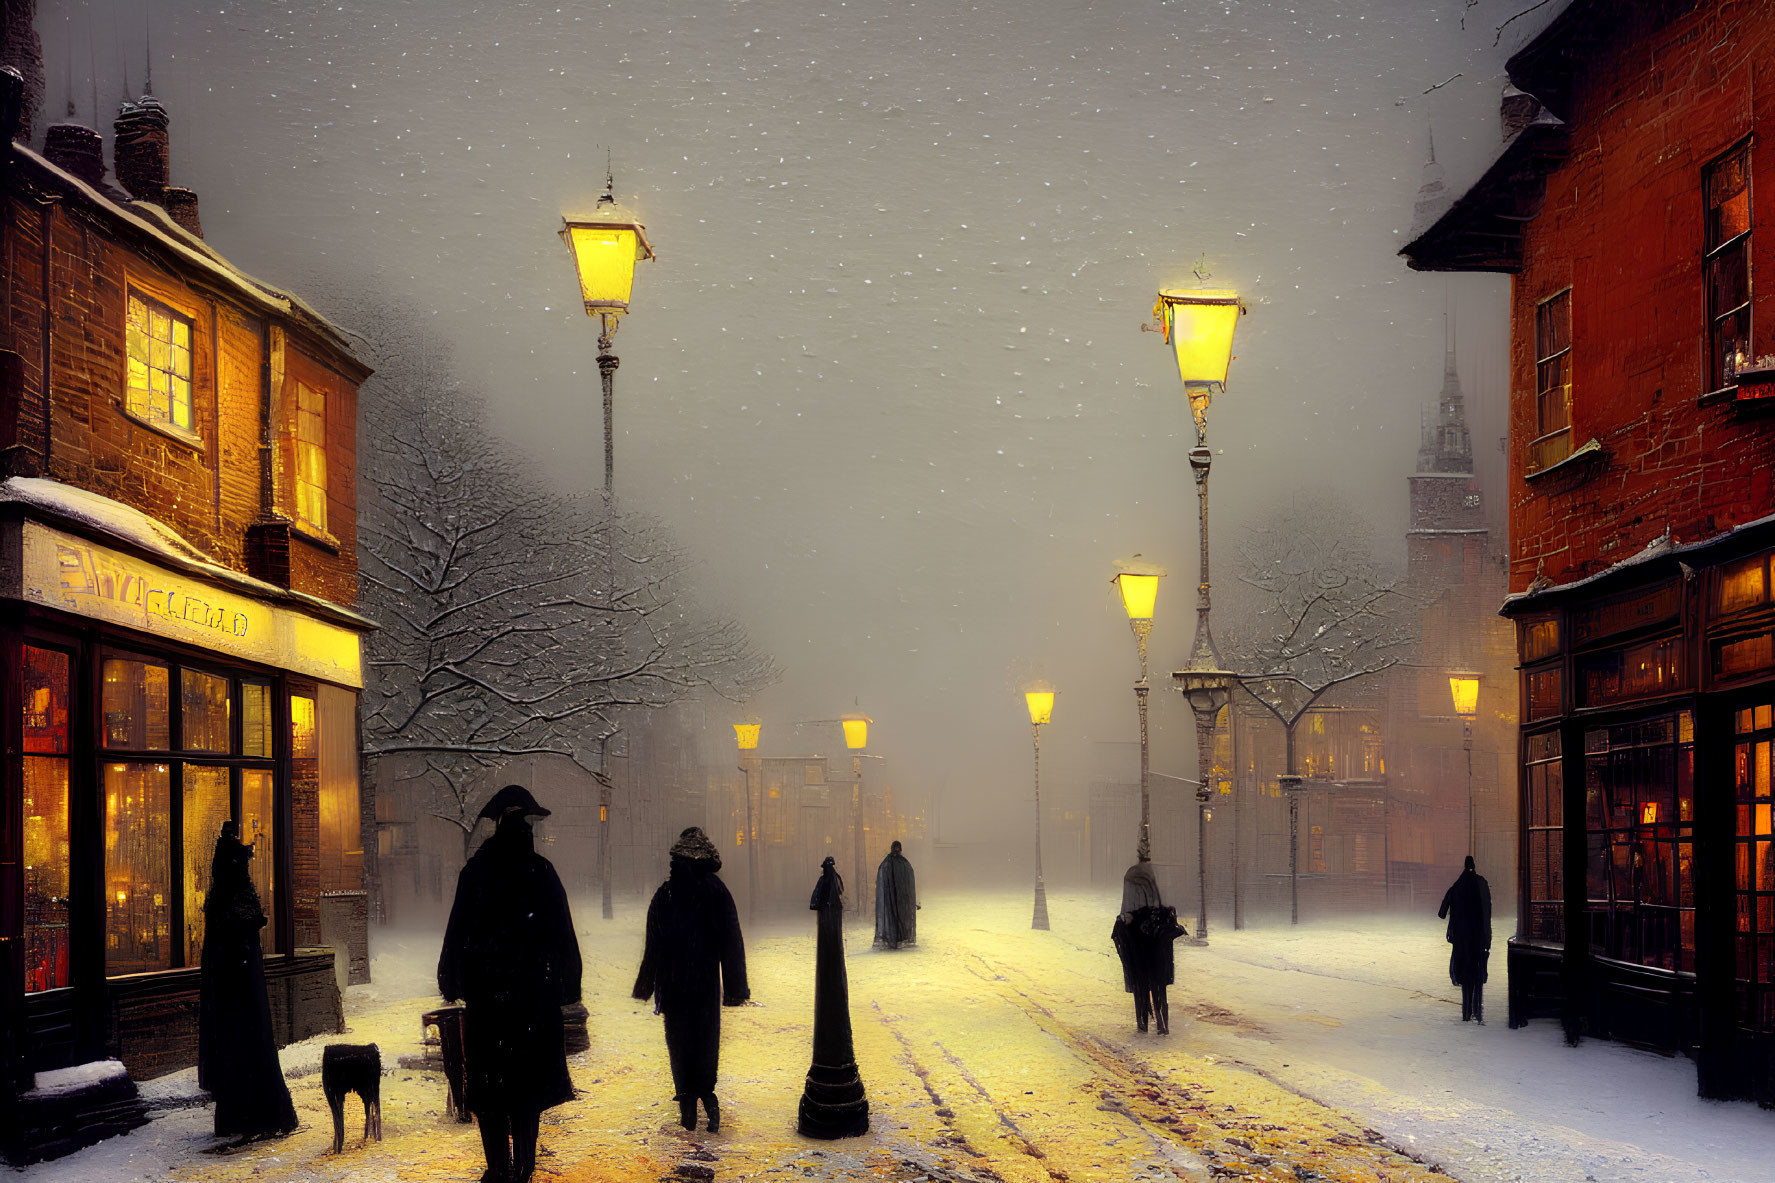 Vintage-style snowy evening street scene with lit lamps, pedestrians, and a dog.